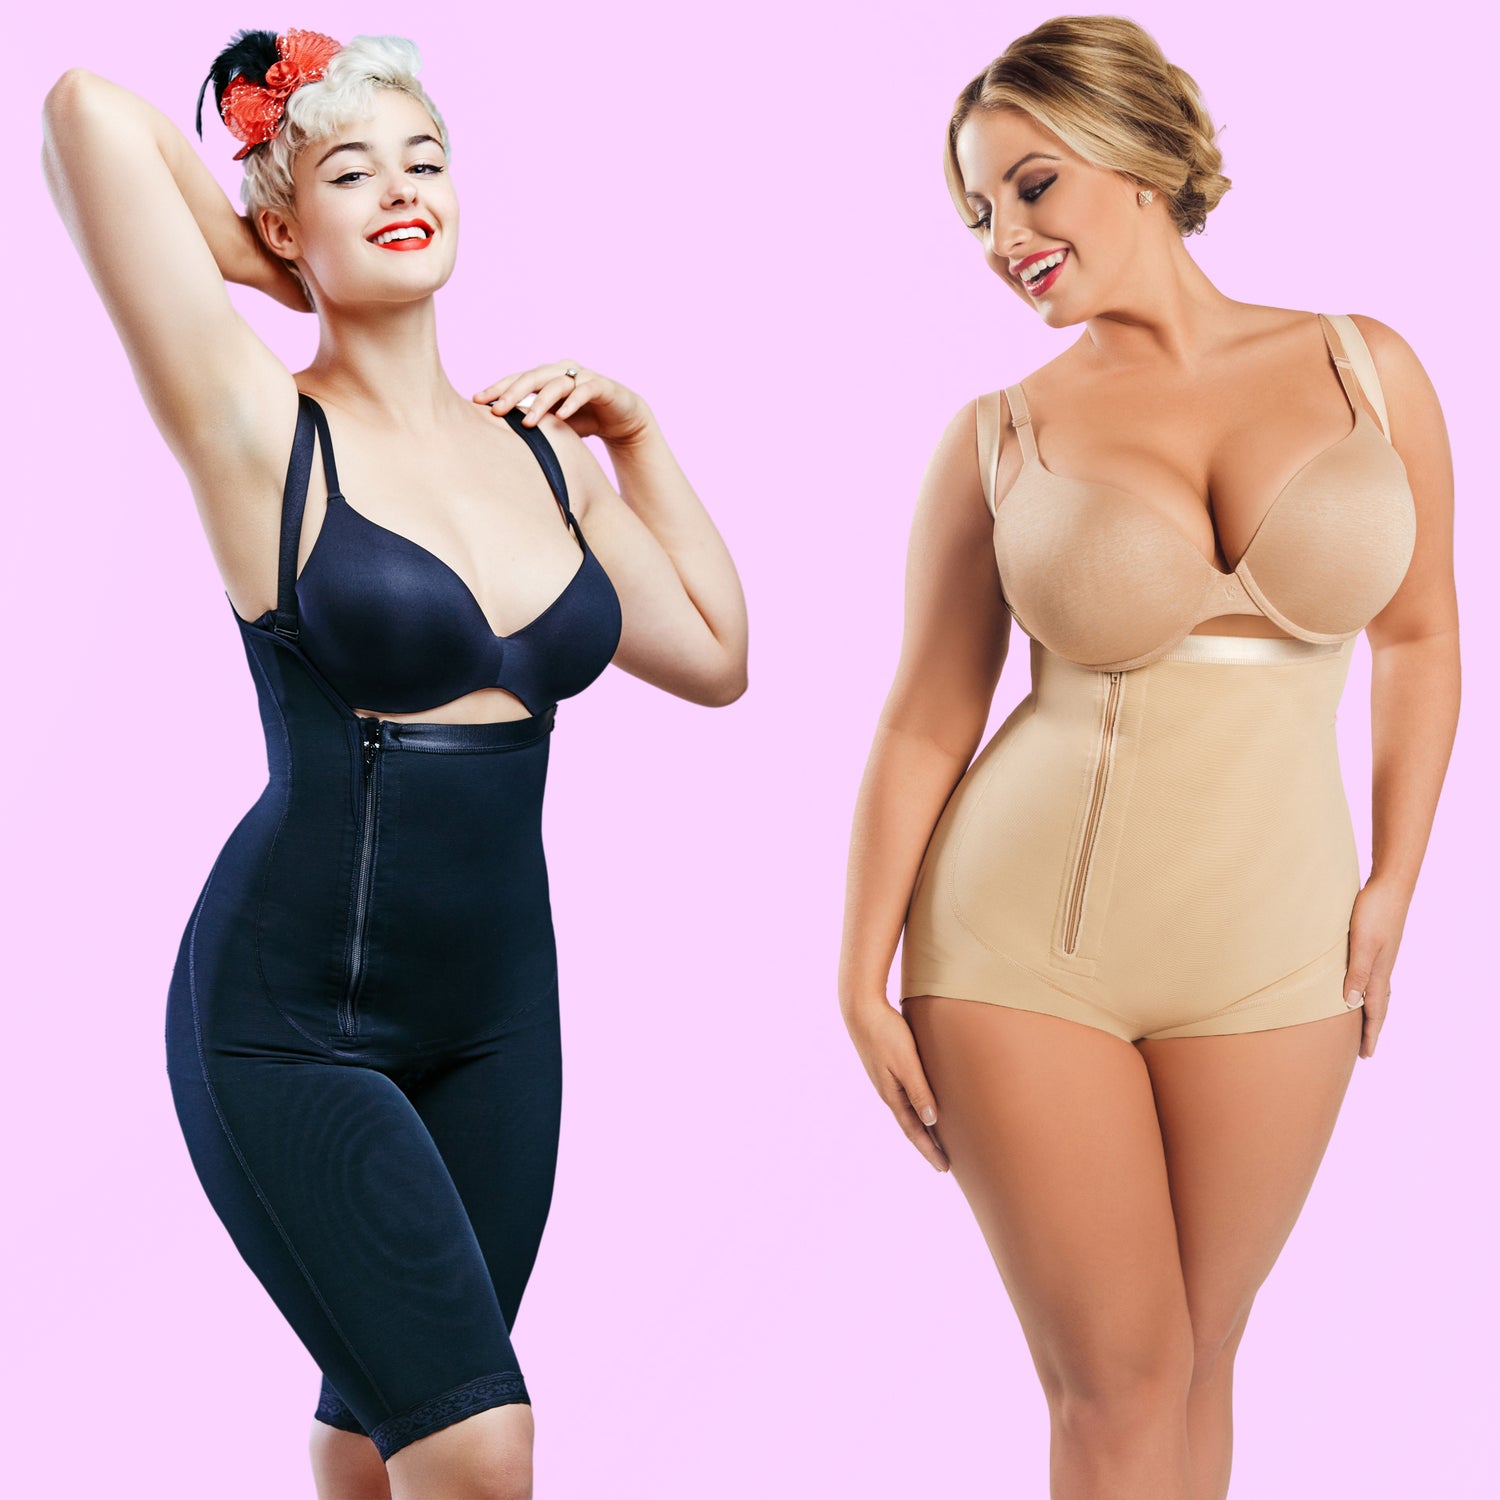 Diva's Curves Shapewear Compression Foundation garment That Will